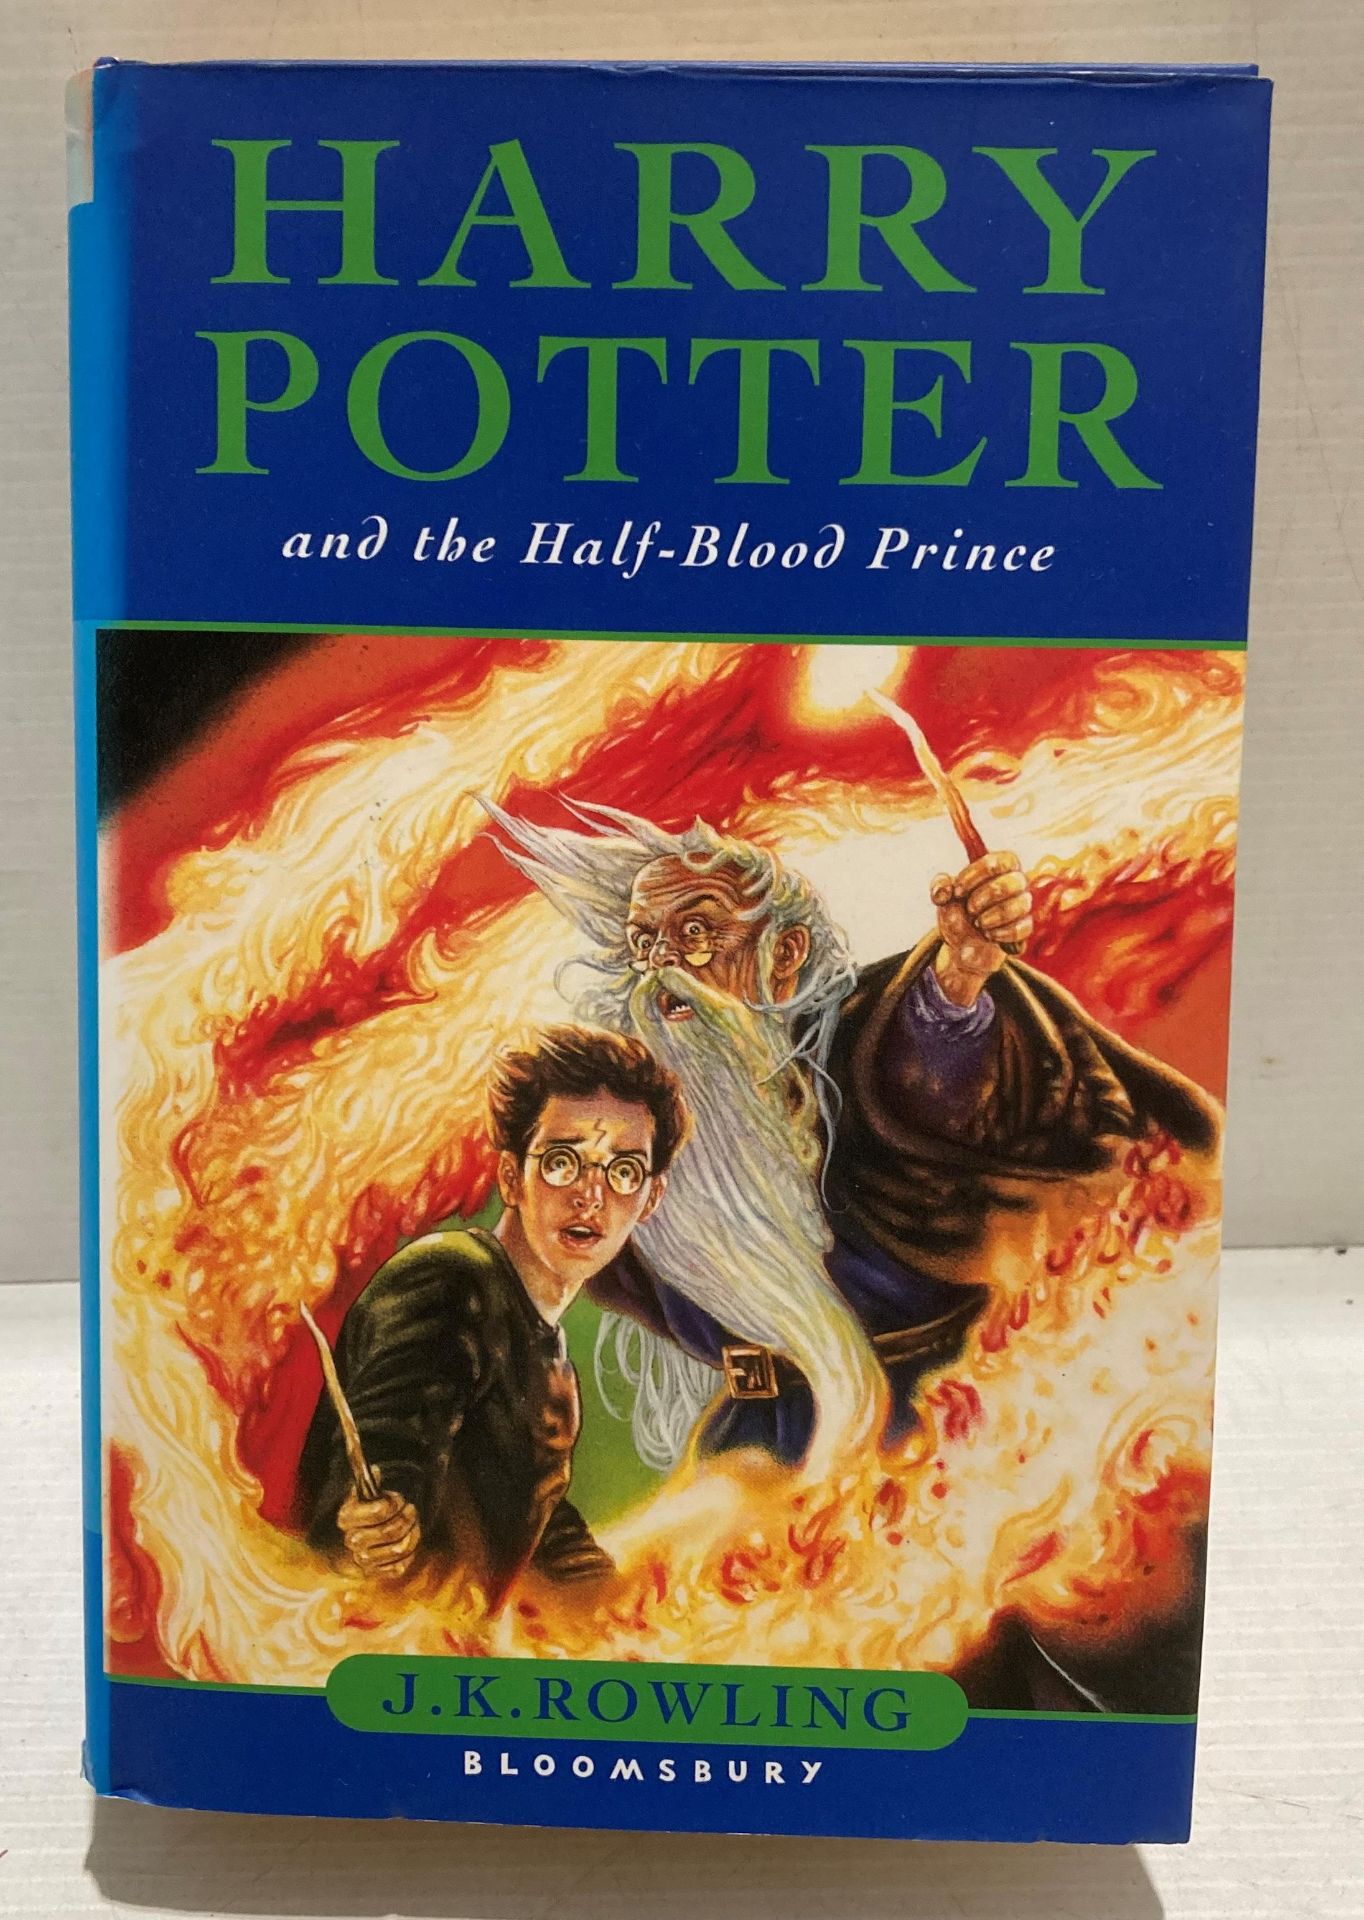 J K Rowling 'Harry Potter and the Half-Blood Prince', first edition, published by Bloomsbury 2005,